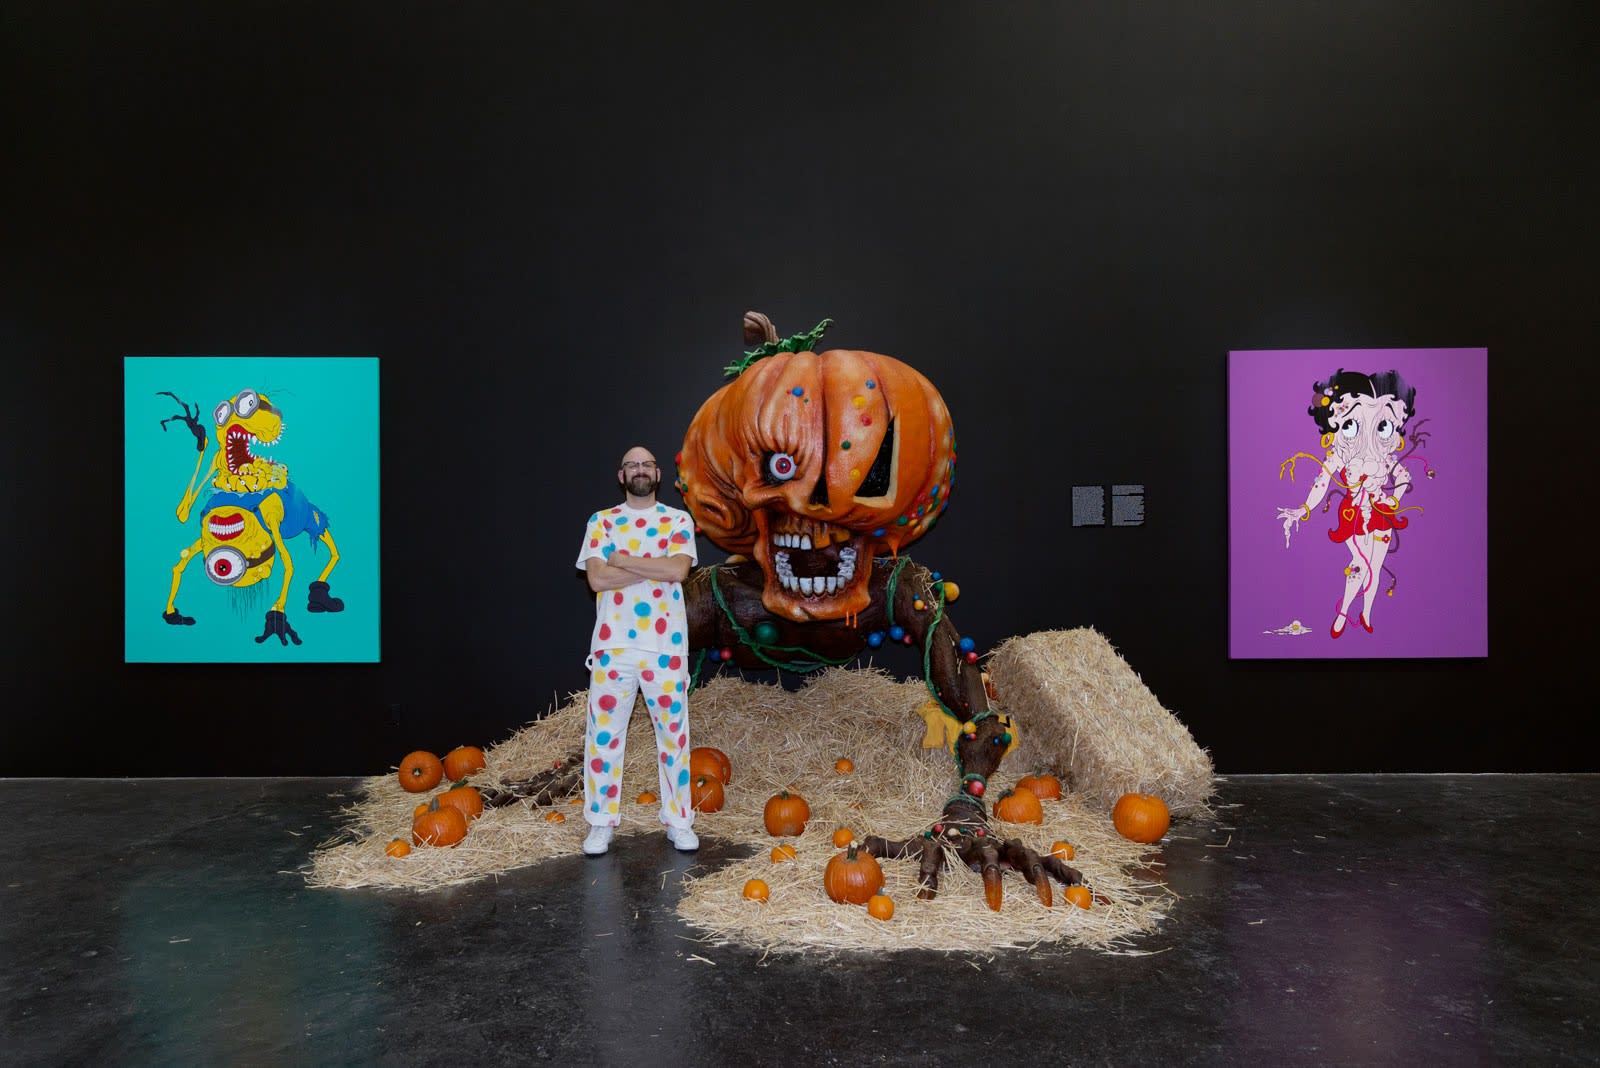 Artist Alex Pardee standing in front of Giant Pumpkin sculpture with straw and pumpkins on ground and two large paintings on the wall in background